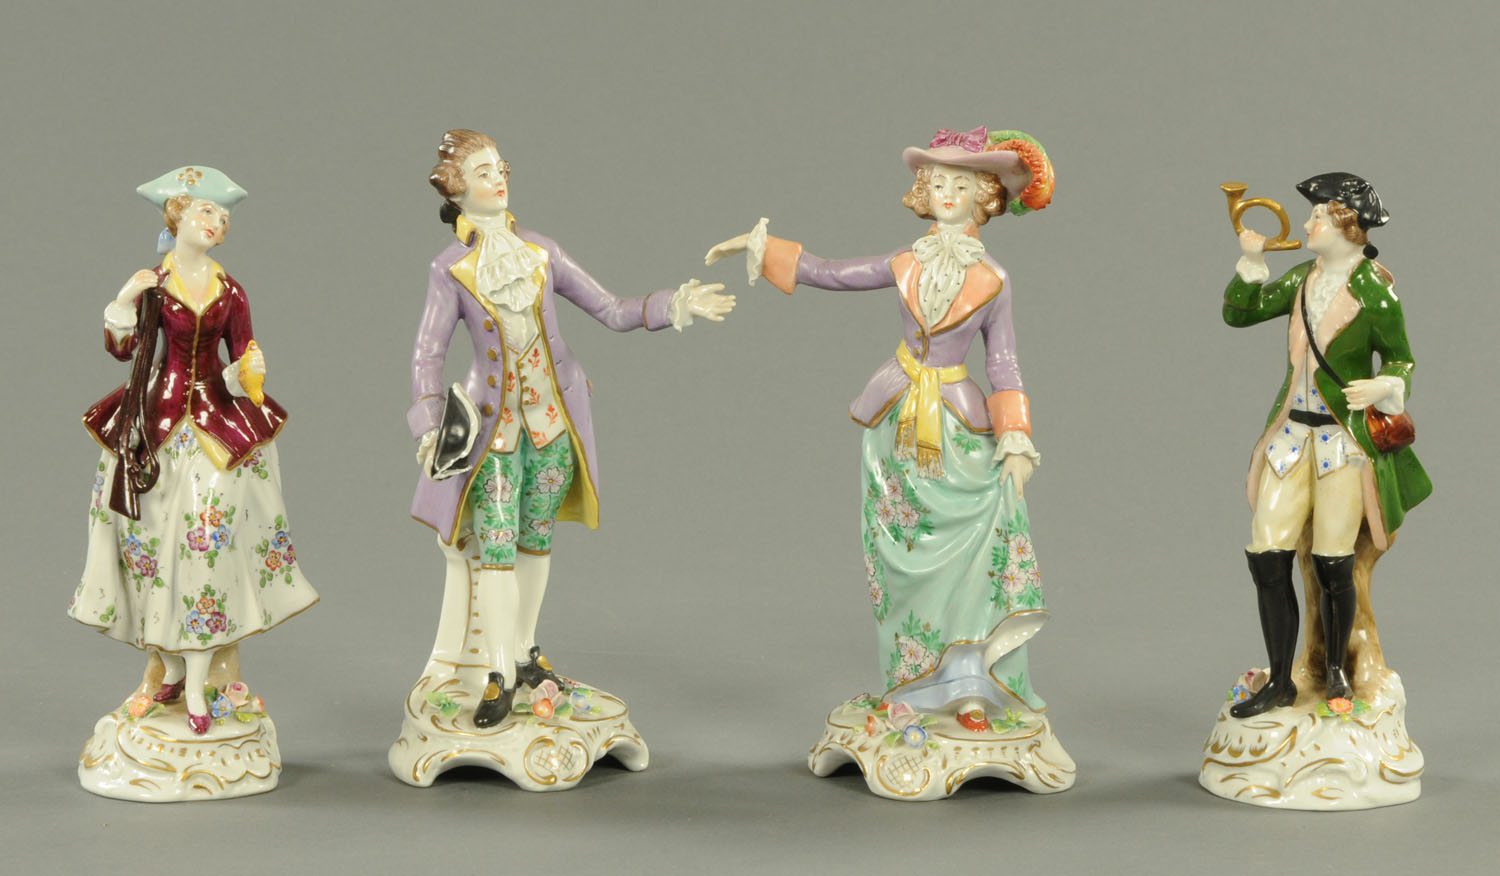 Four Continental porcelain figurines, each with floral encrusted bases. Height 19 cm.